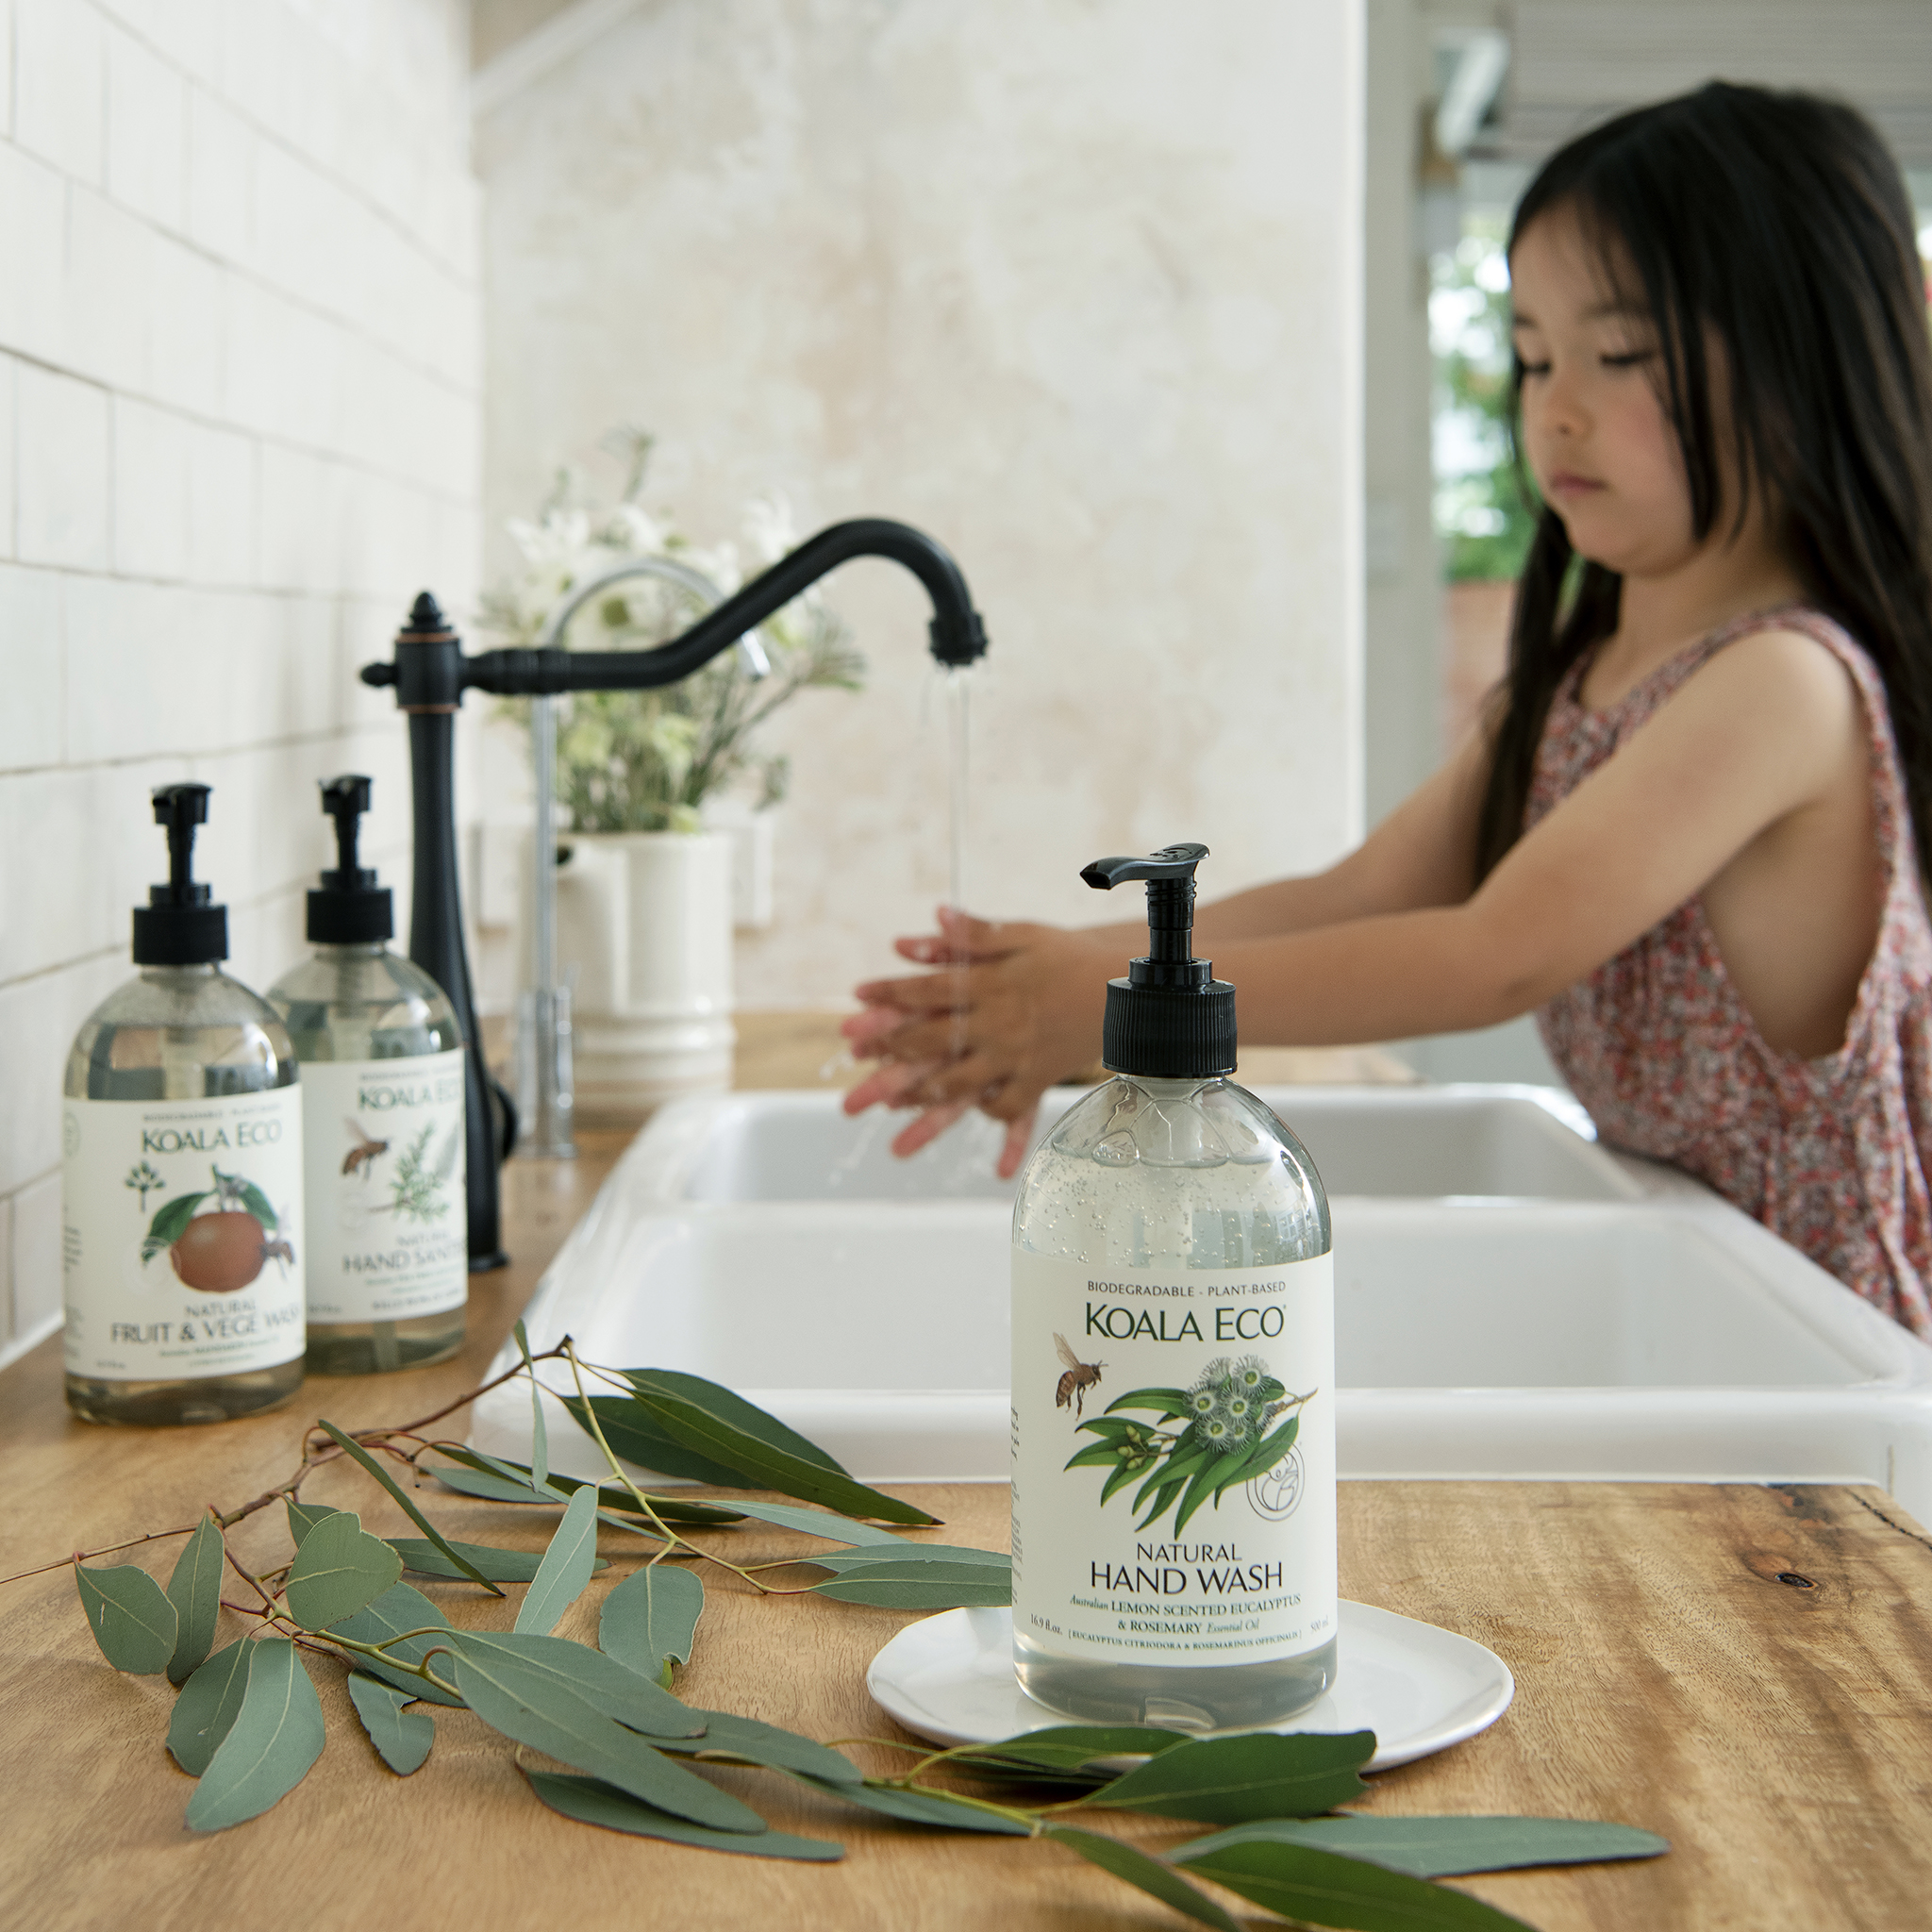 Embrace Natural Living with FREE Samples from Koala Eco!